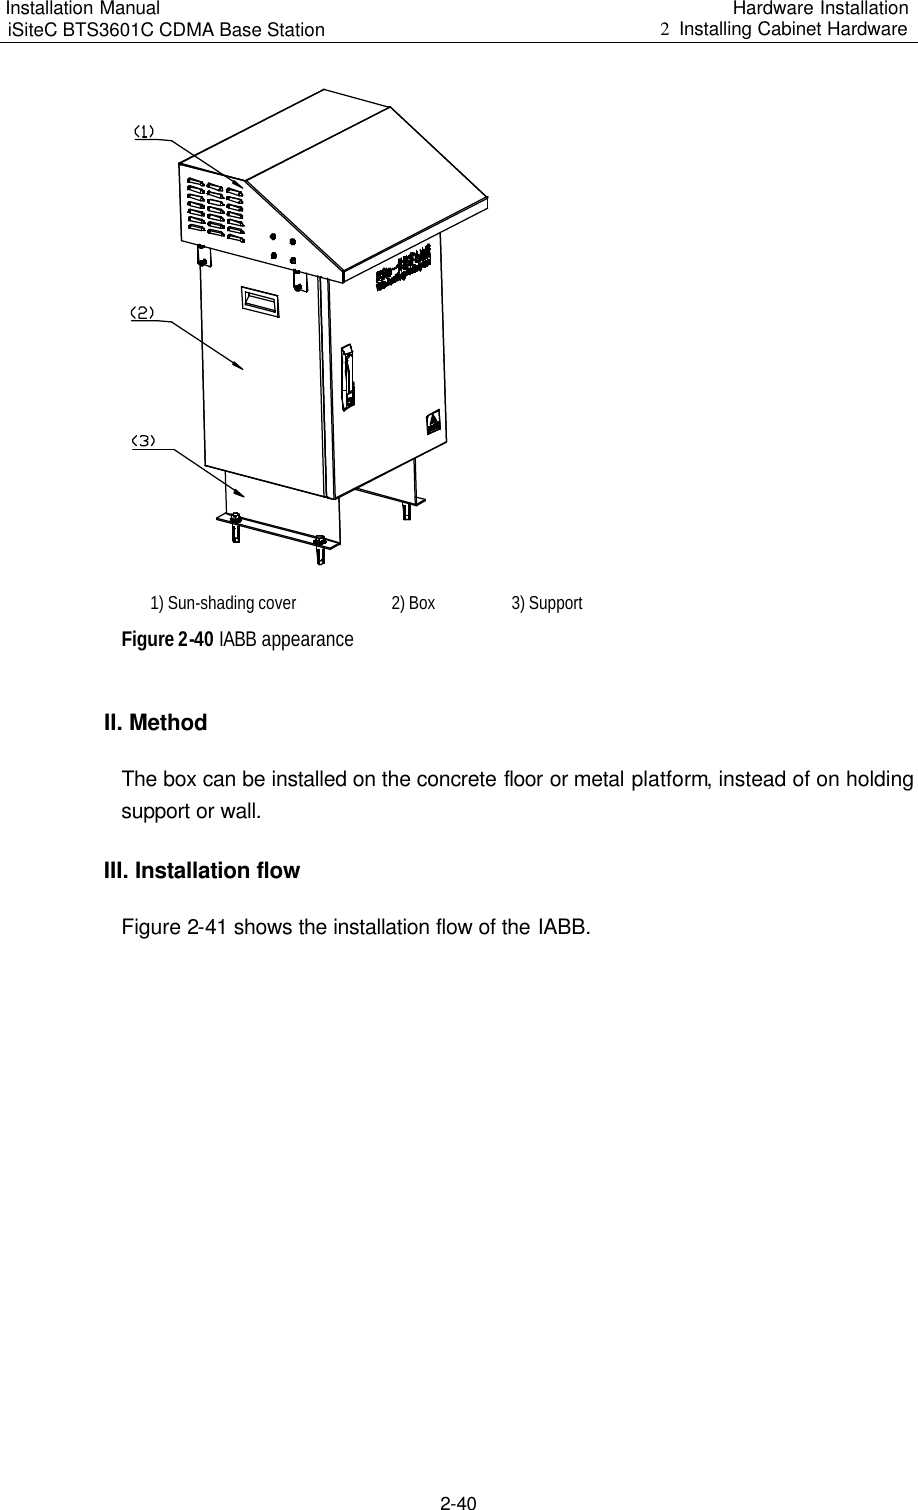 Installation Manual   iSiteC BTS3601C CDMA Base Station Hardware Installation 2  Installing Cabinet Hardware  2-40   1) Sun-shading cover   2) Box   3) Support Figure 2-40 IABB appearance II. Method The box can be installed on the concrete floor or metal platform, instead of on holding support or wall.  III. Installation flow Figure 2-41 shows the installation flow of the IABB. 